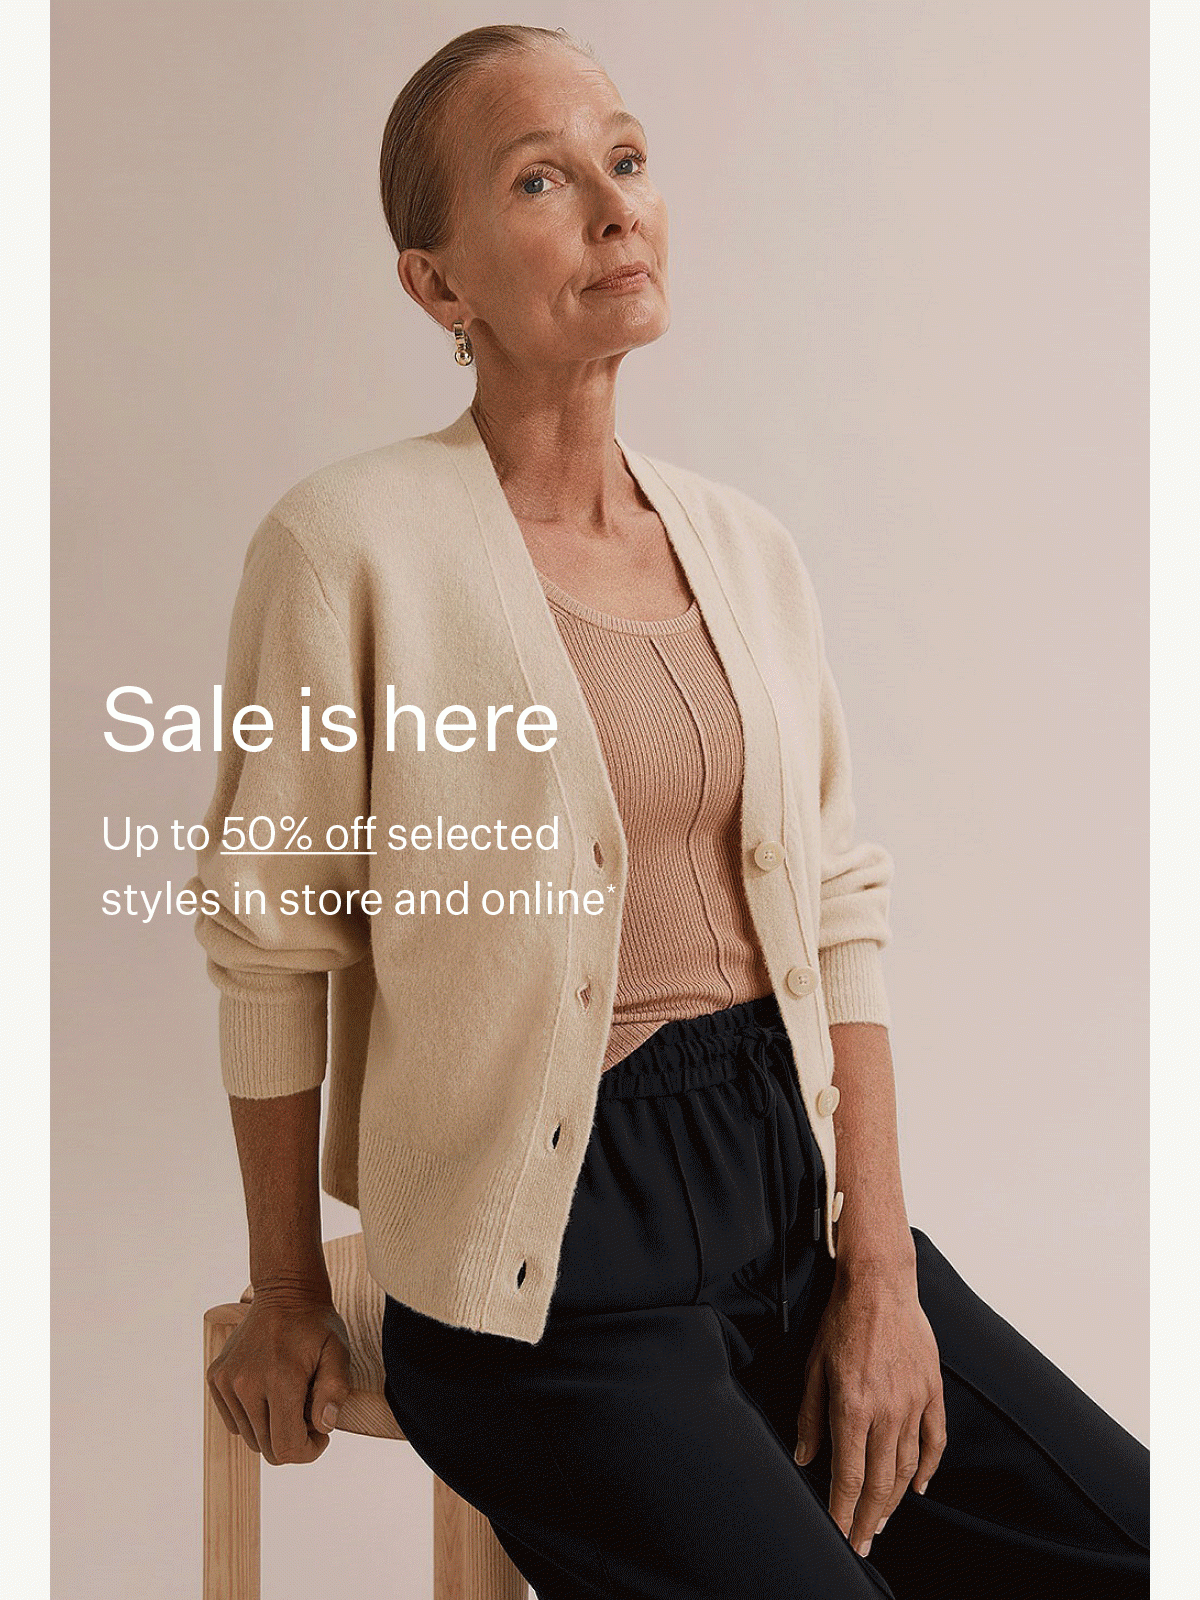 Sale is here | Up to 50% off selected styles in store and online*